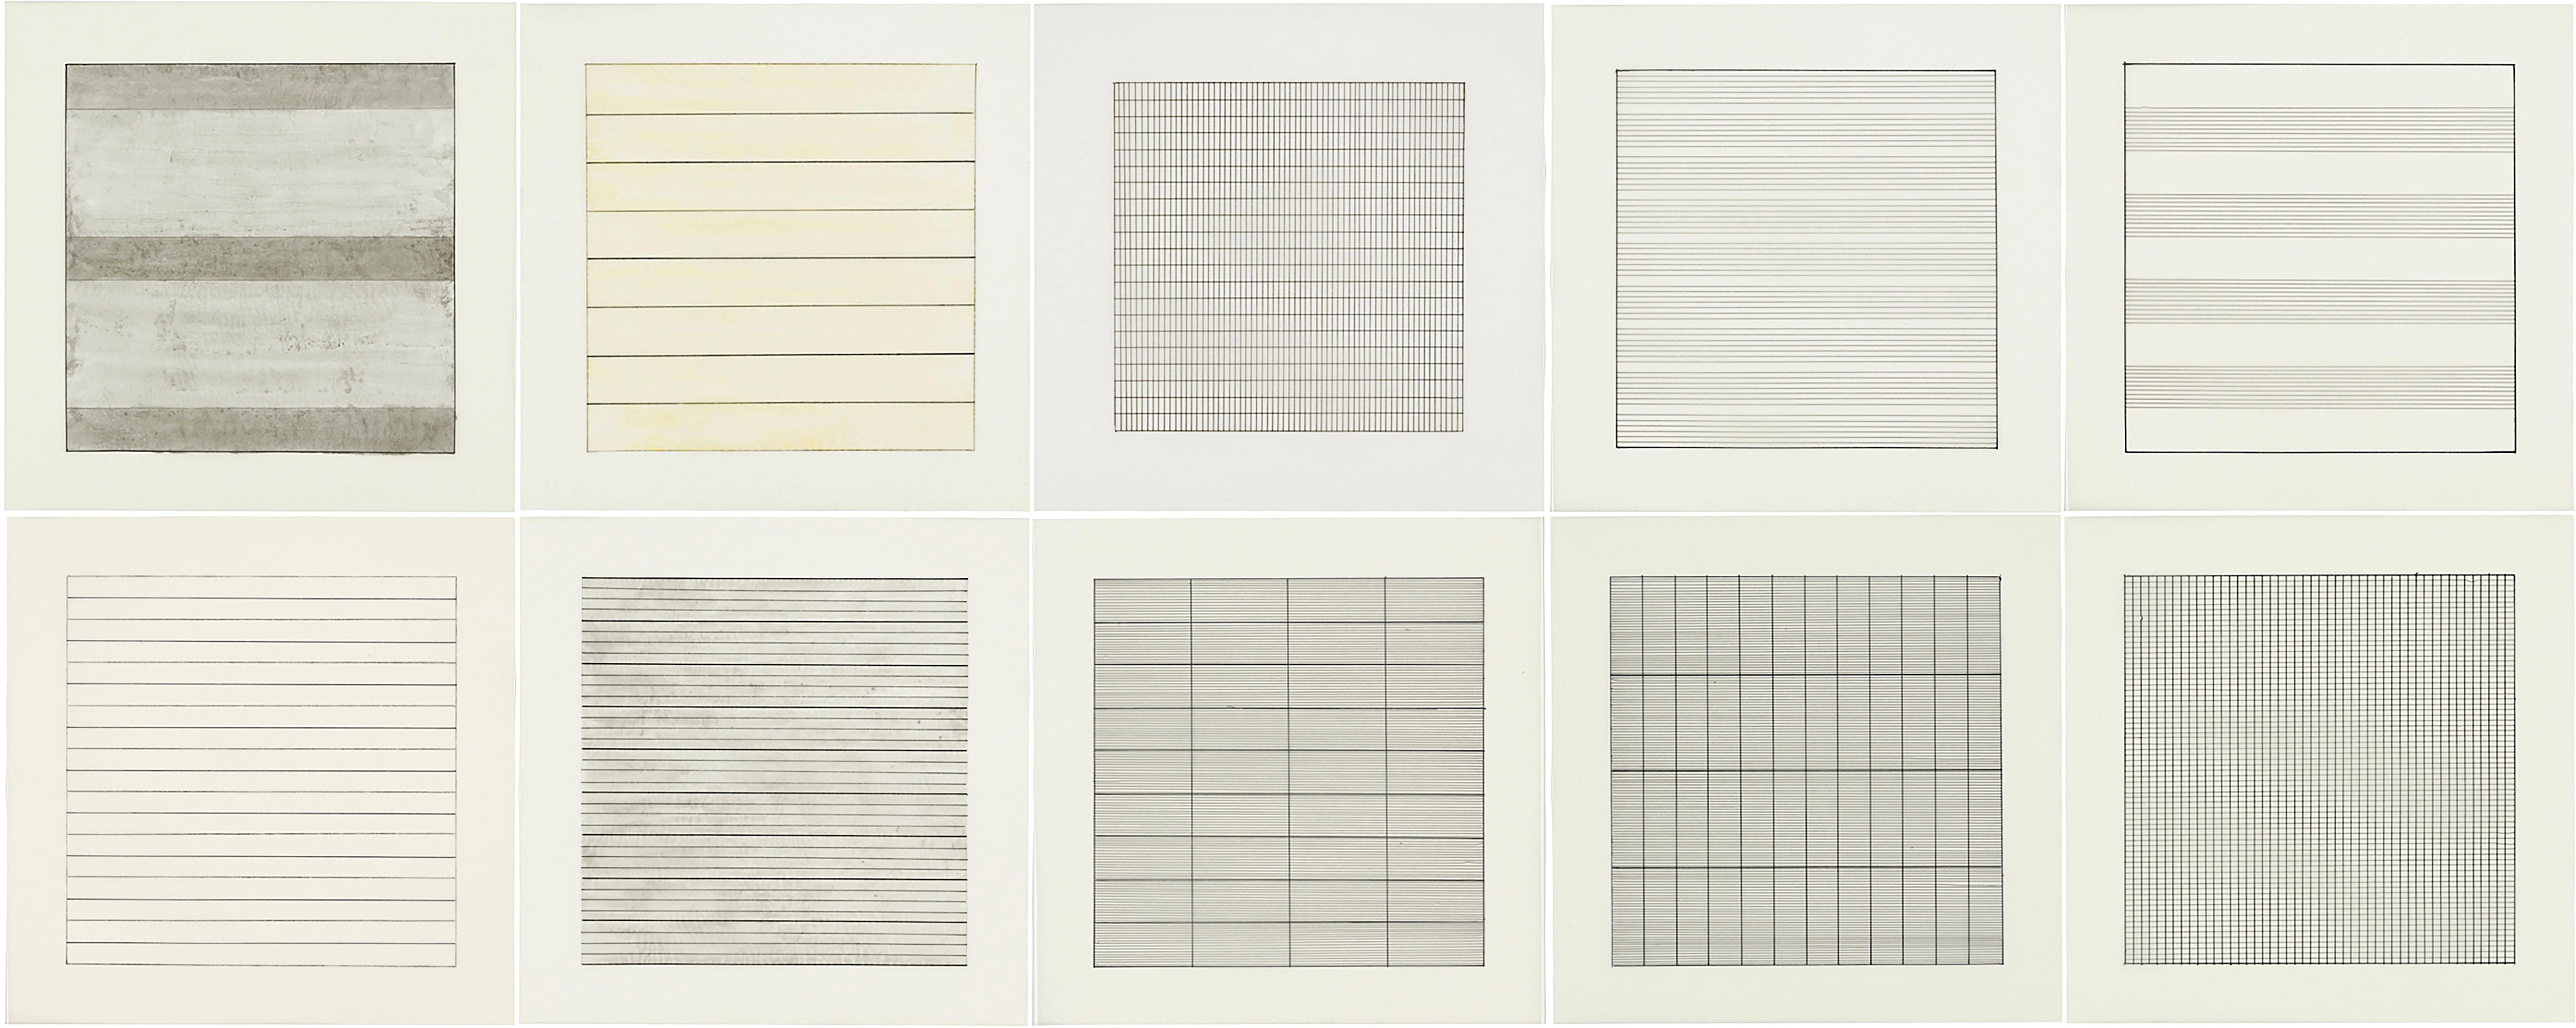 agnes martin paintings and drawings